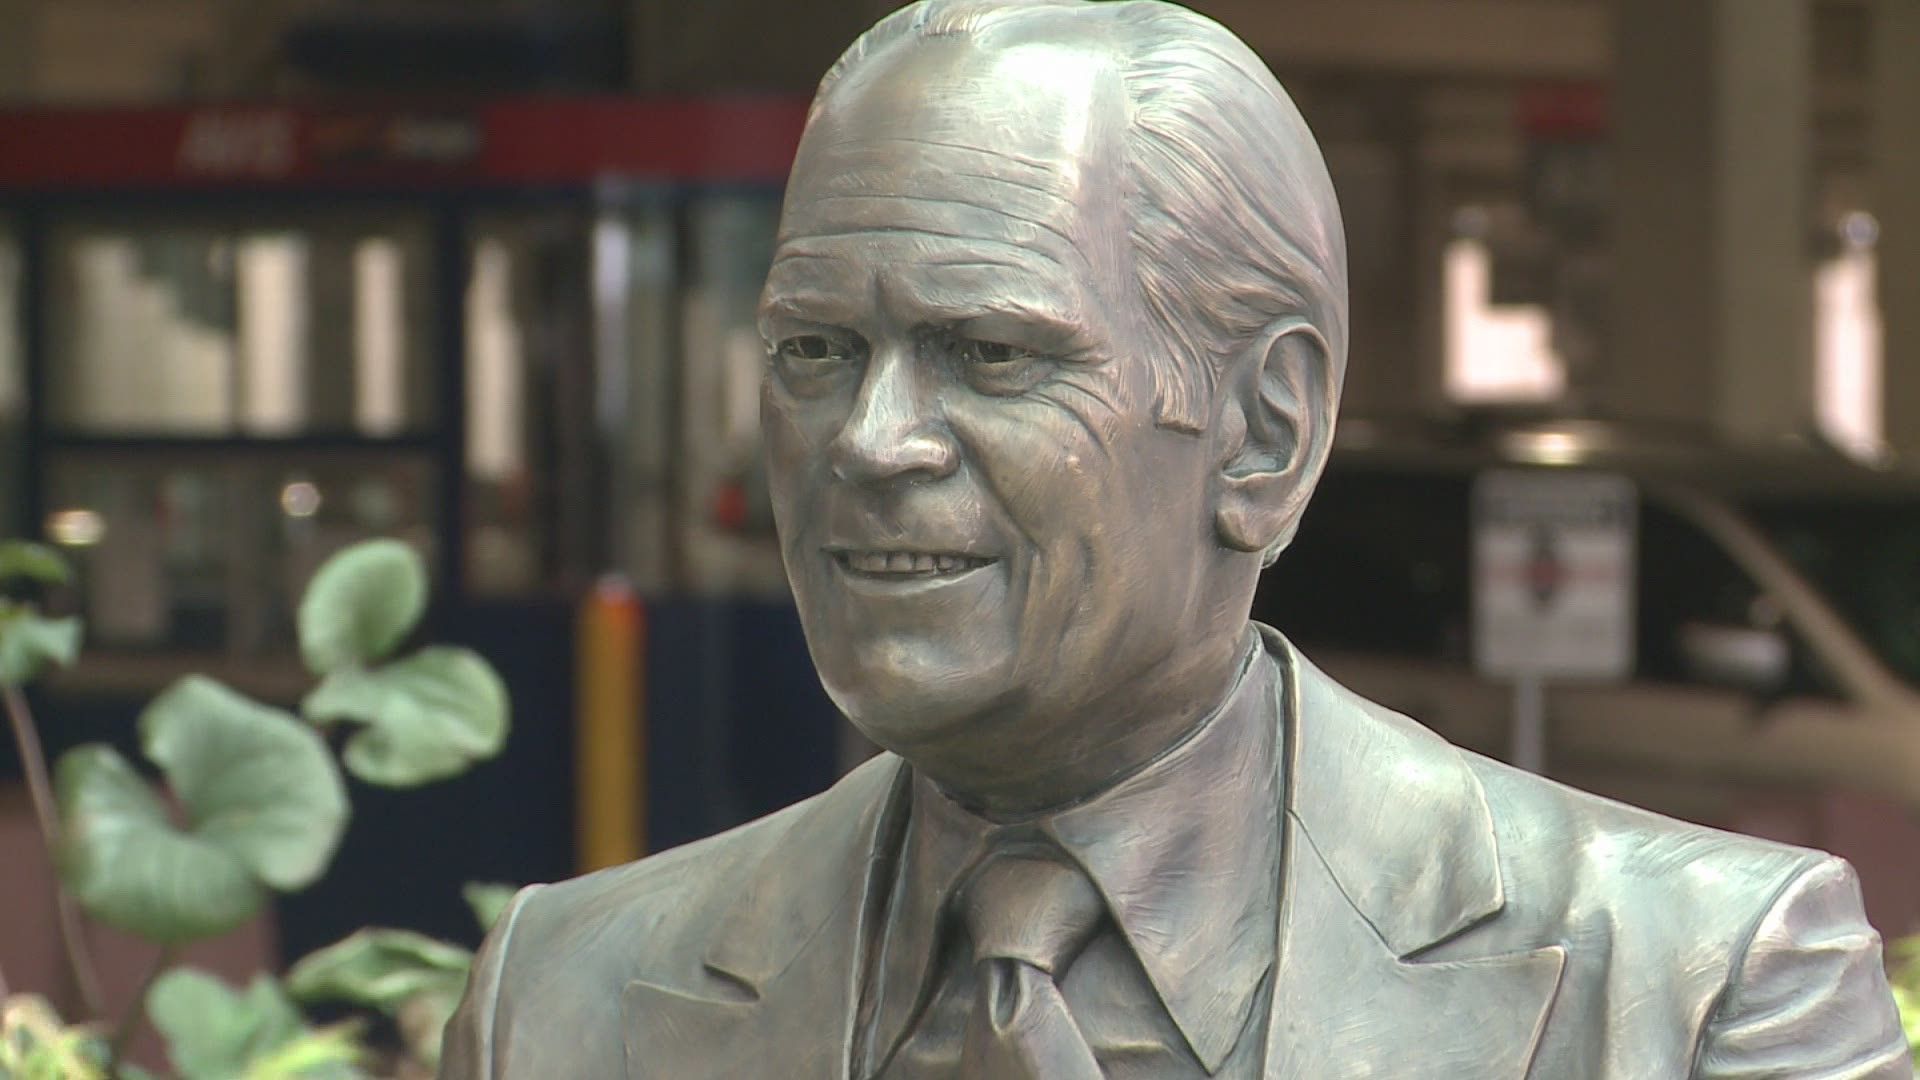 The Gerald R. Ford International Airport has a new statue in honor of President Ford.